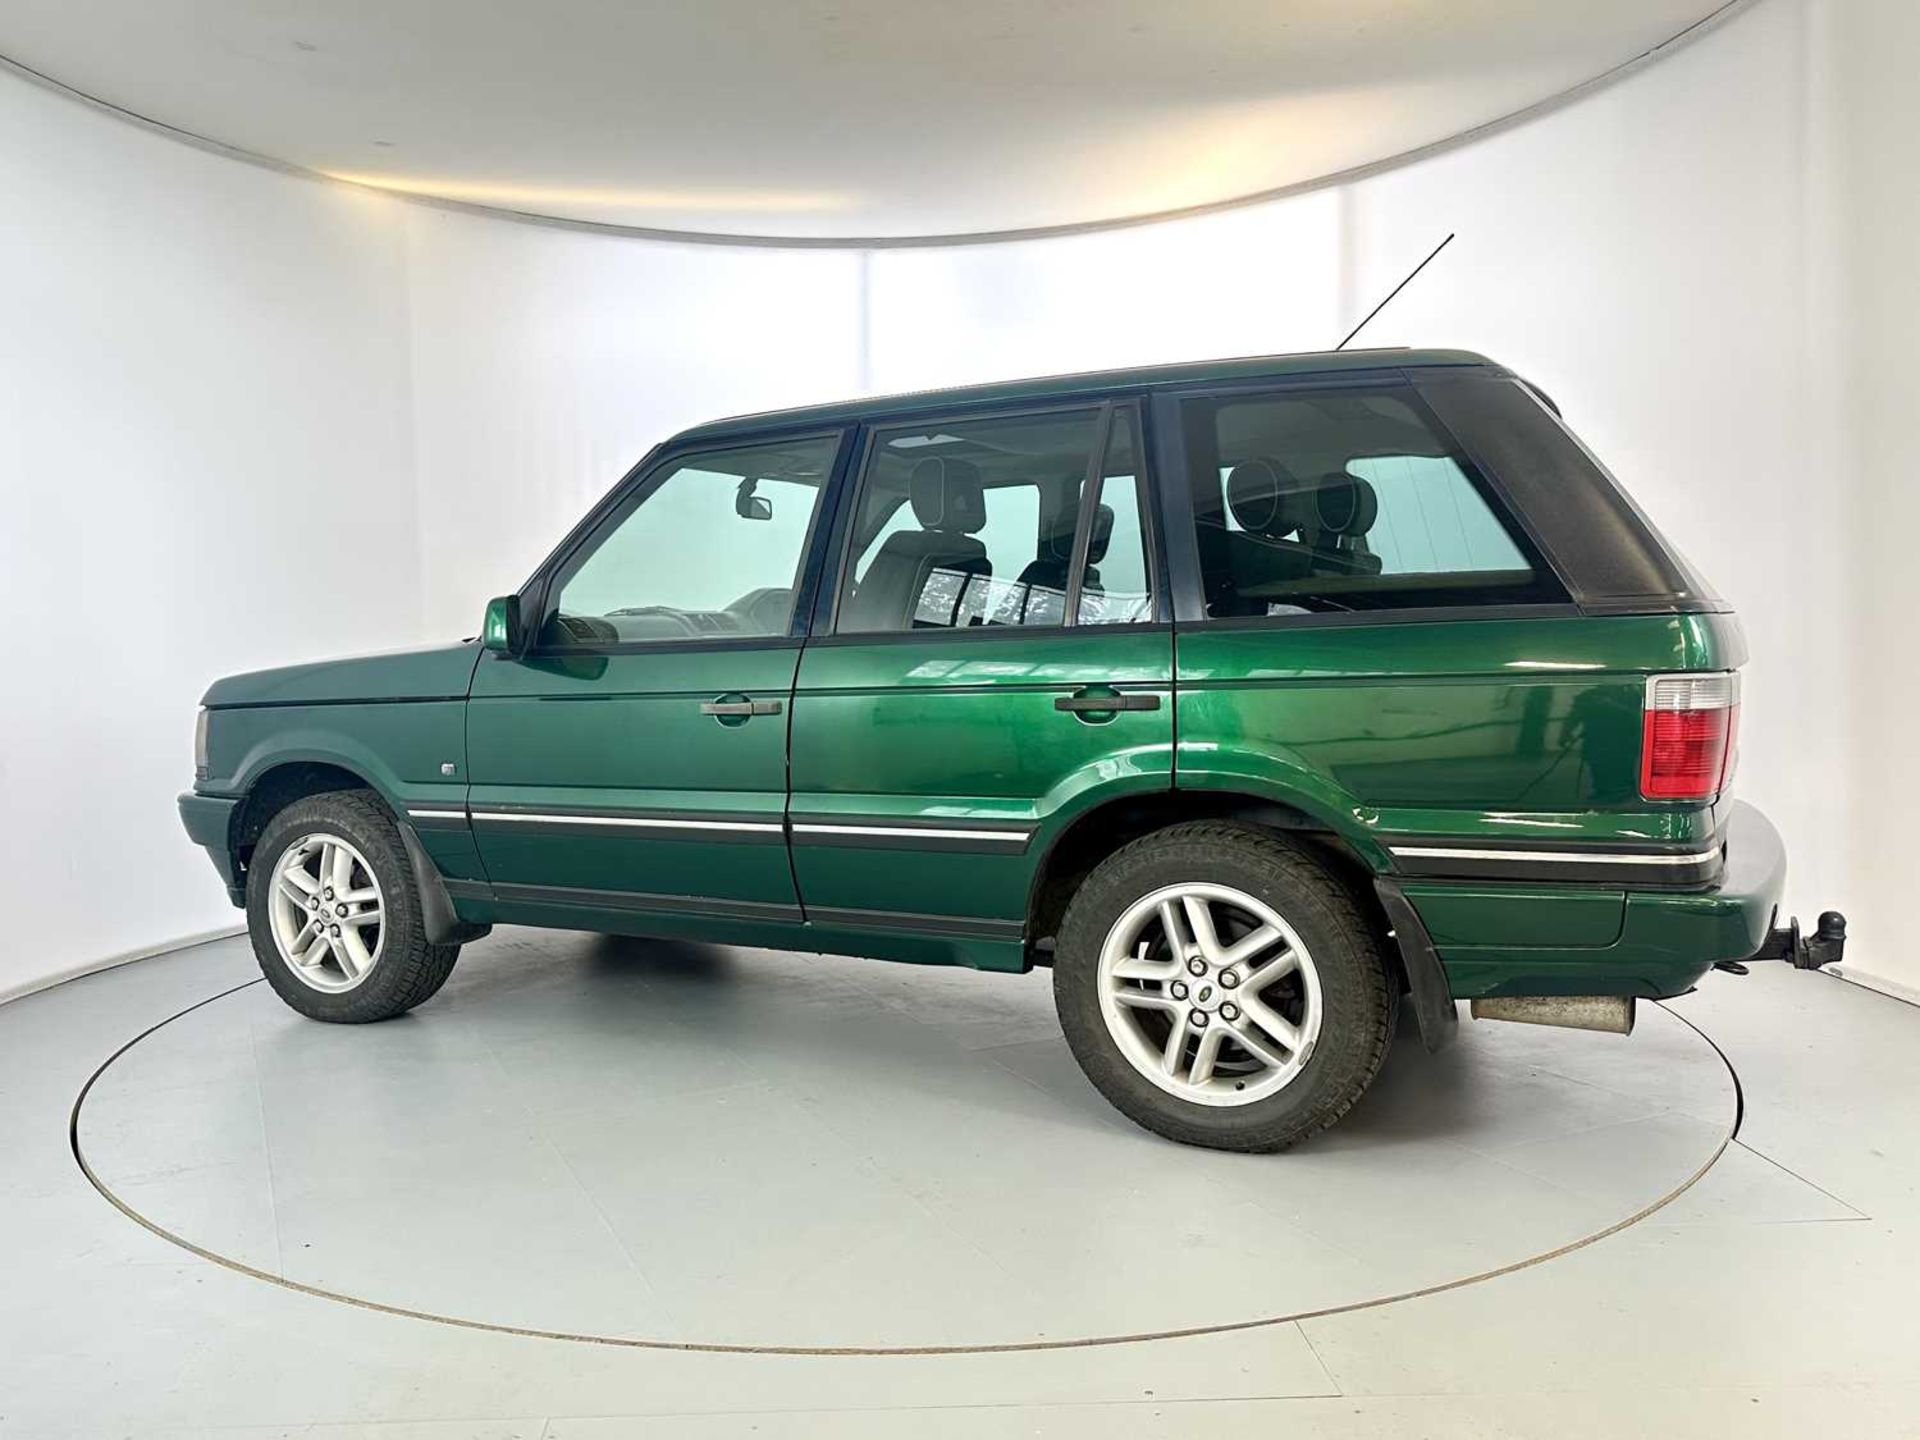 2001 Land Rover Range Rover 30th Anniversary Edition - Image 6 of 35